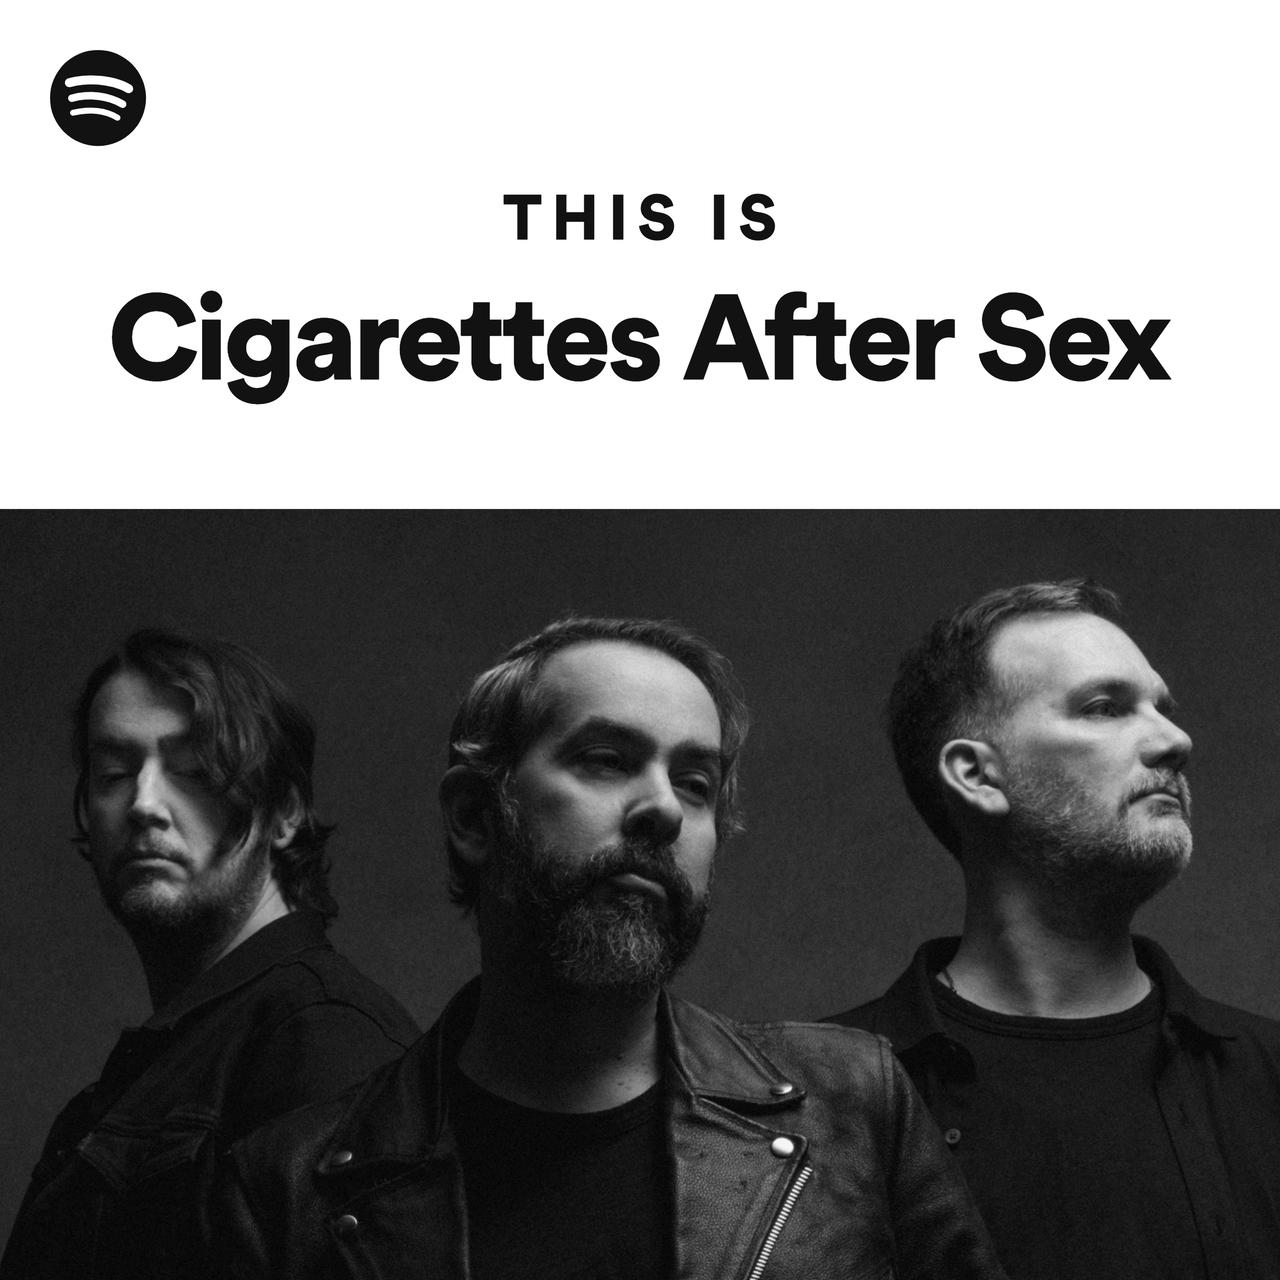 This Is Cigarettes After Sex Spotify Playlist